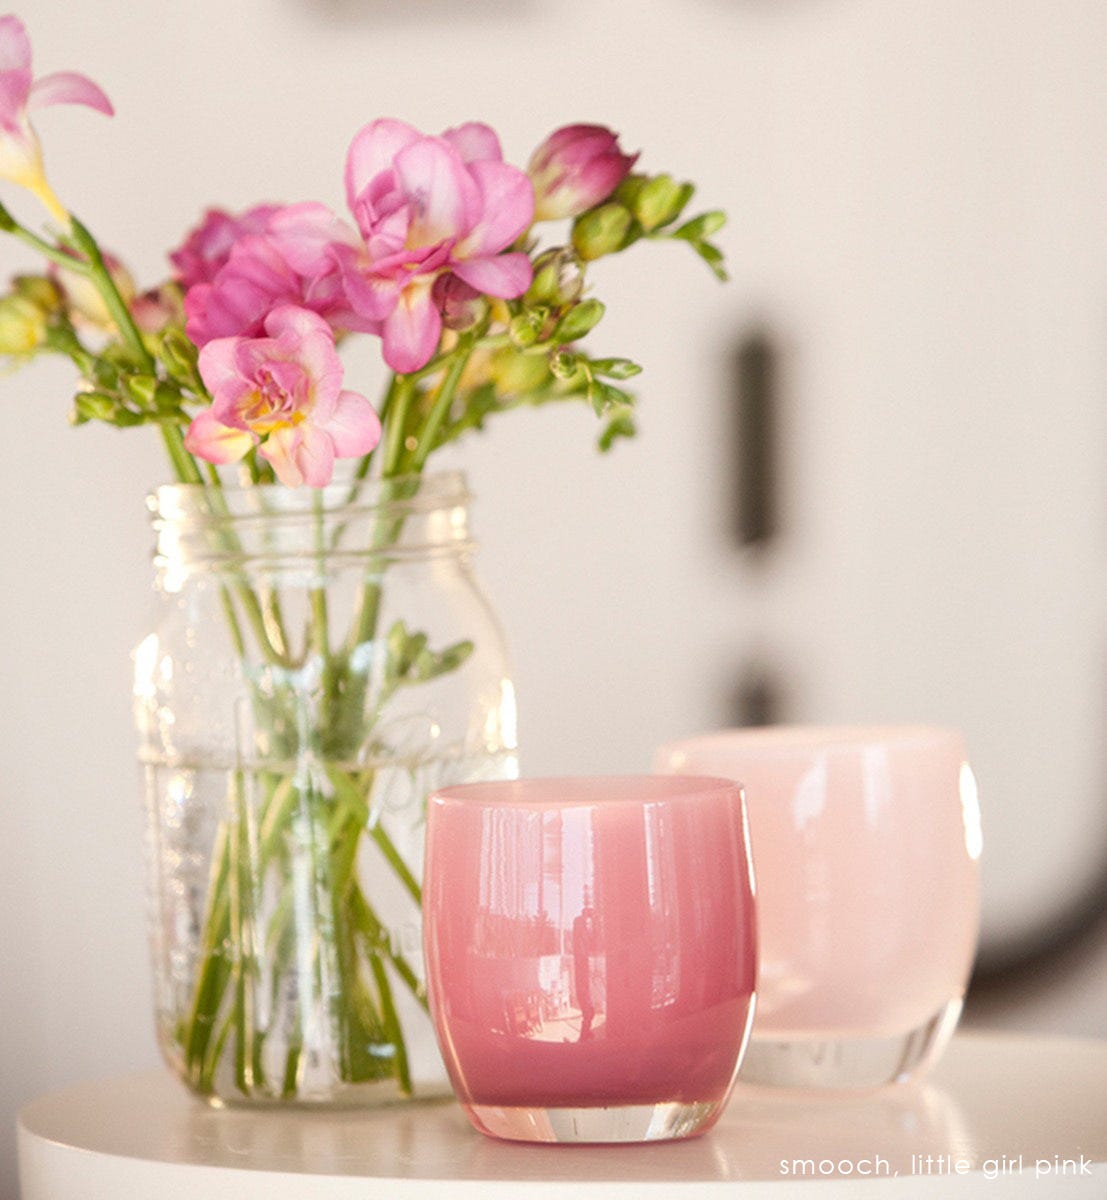 smooch deep pink hand-blown glass votive candle holder. Paired with little girl pink.